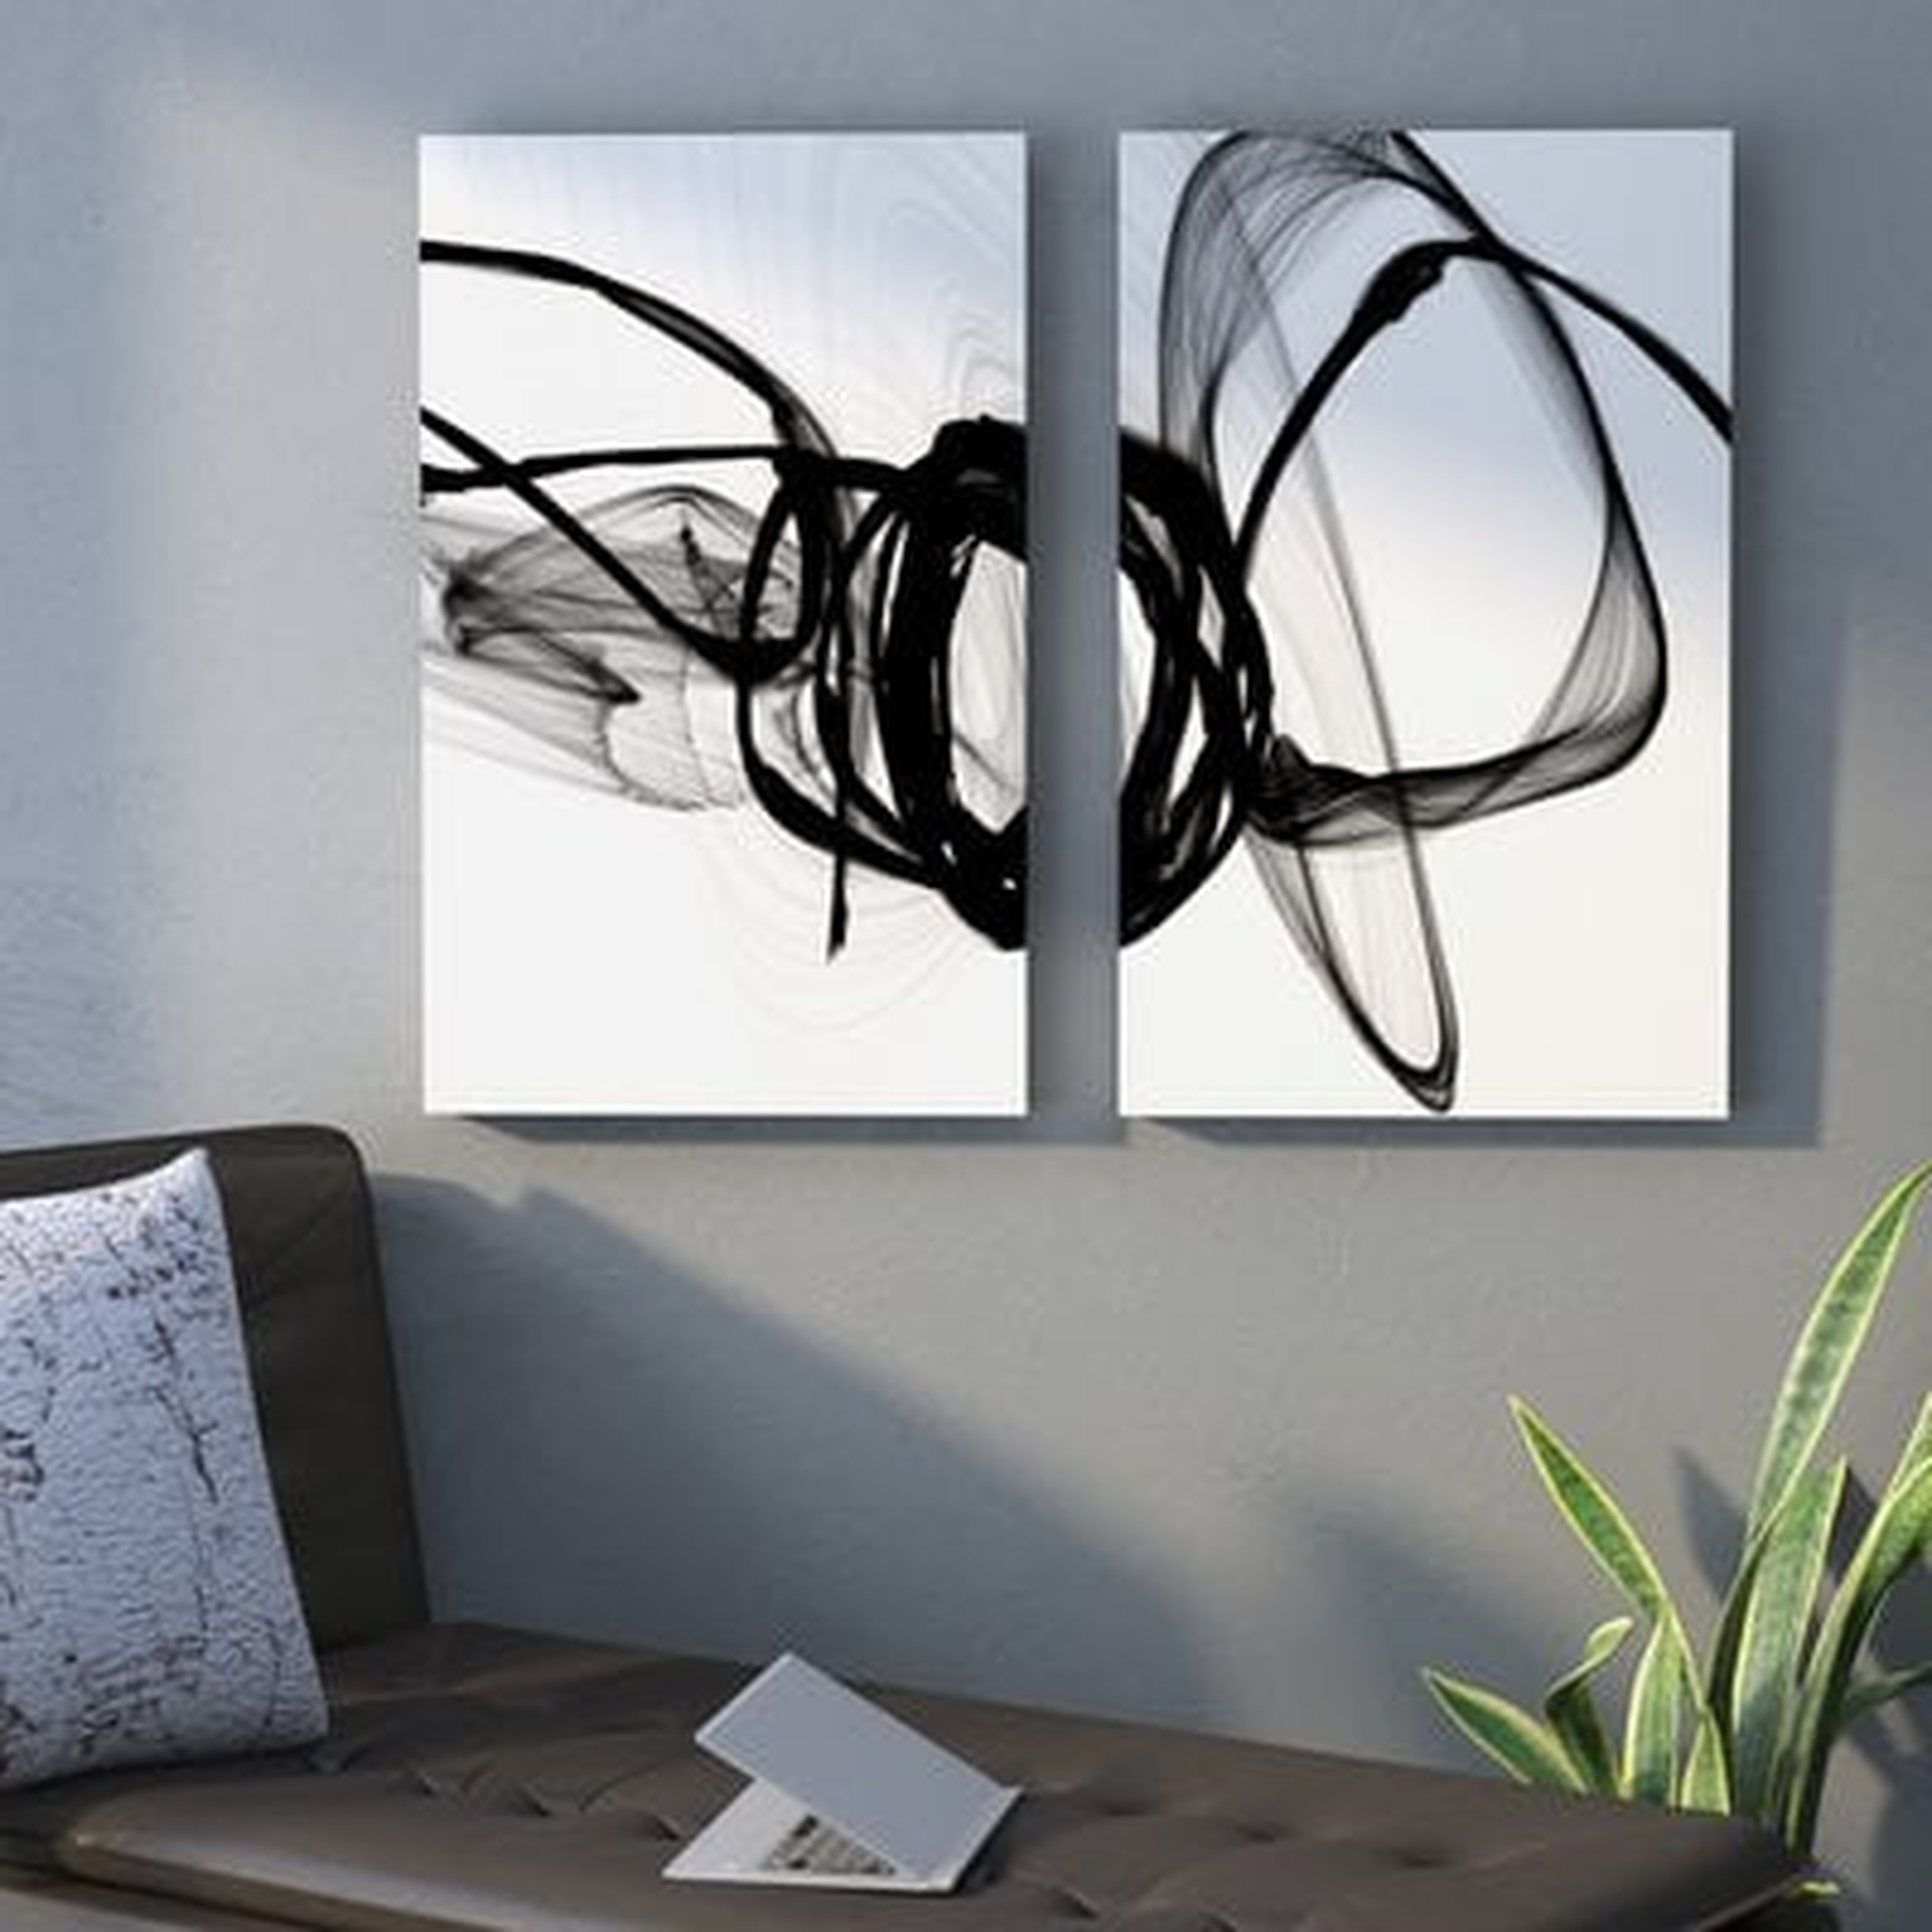 That Energy 2 Piece Graphic Art on Wrapped Canvas Set - Birch Lane